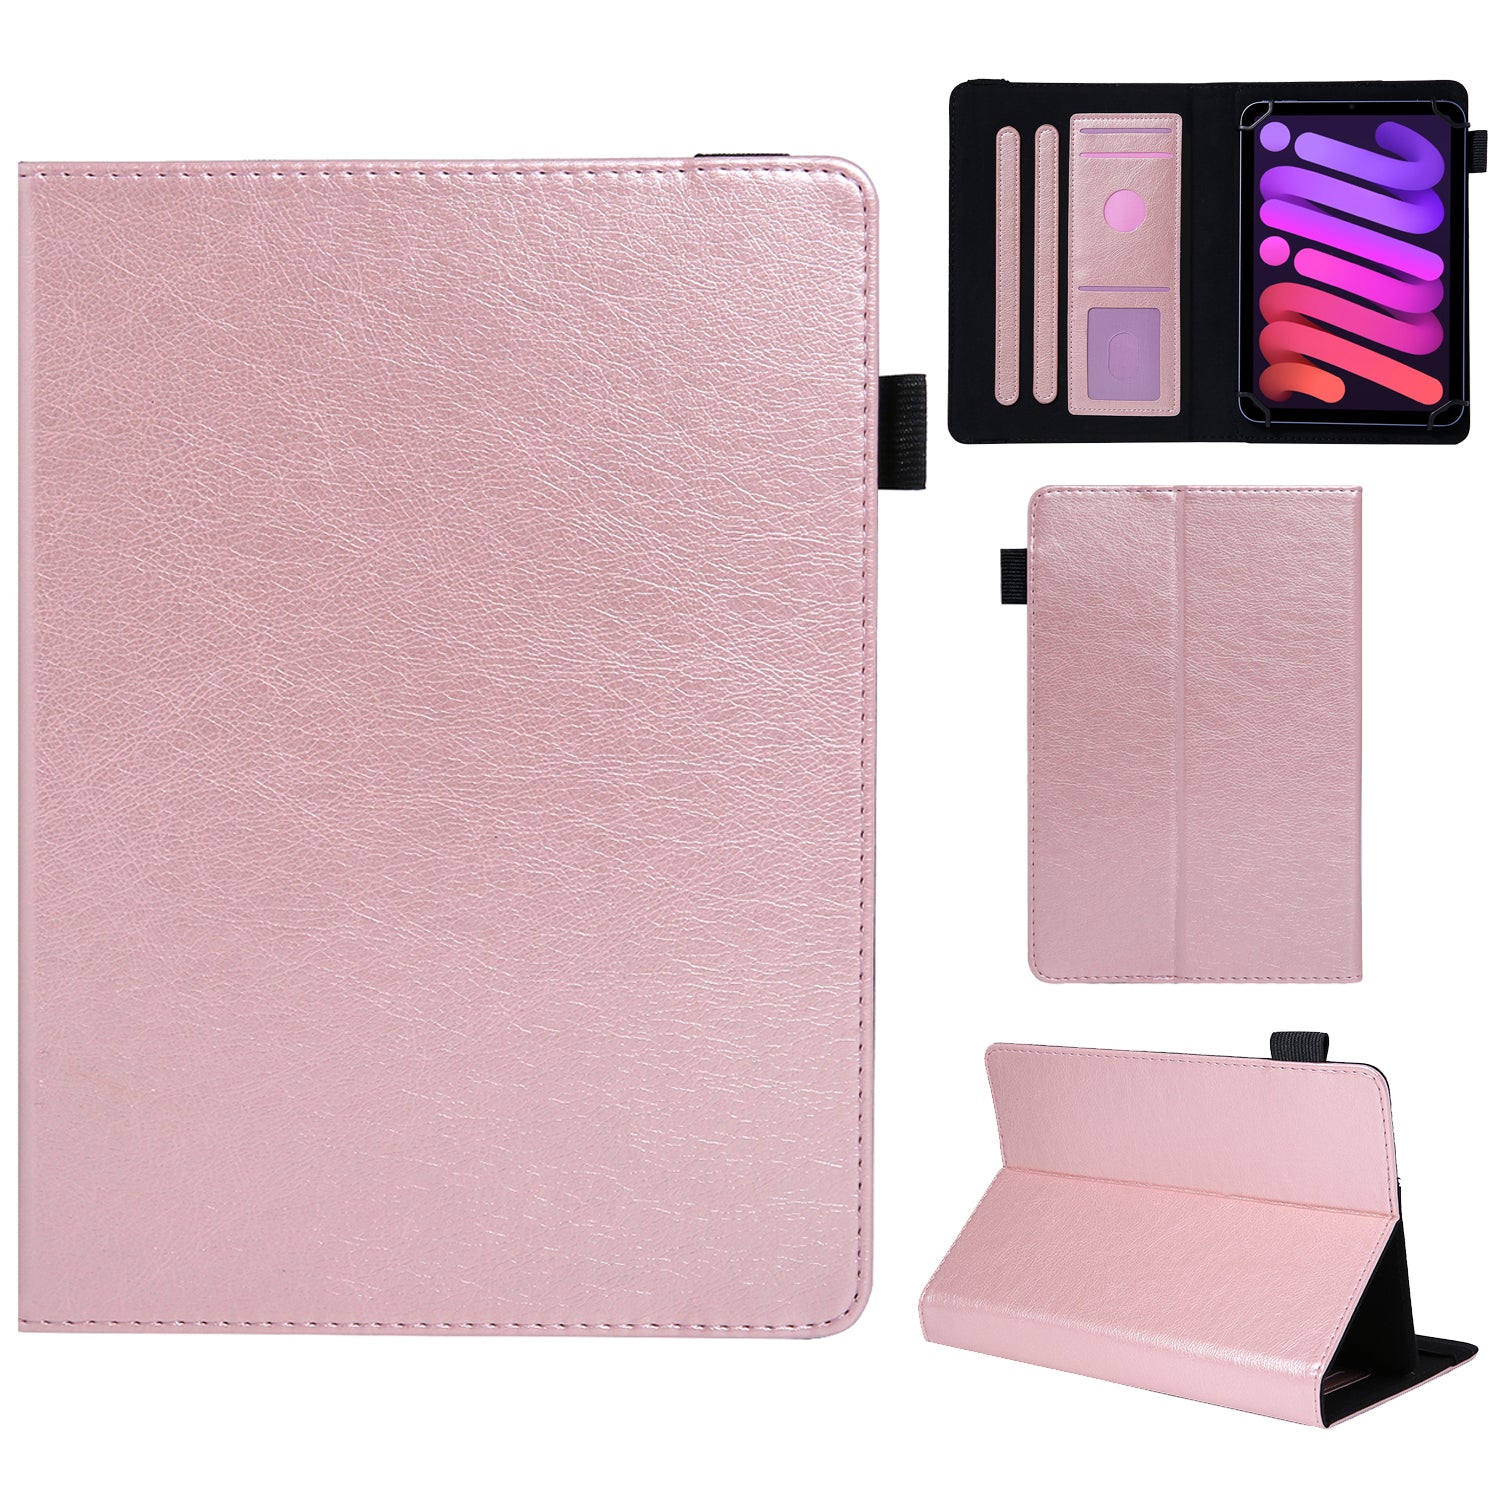 10-inch Tablet Case Card Slots PU Leather Flip Cover with Folding Stand - Rose Gold